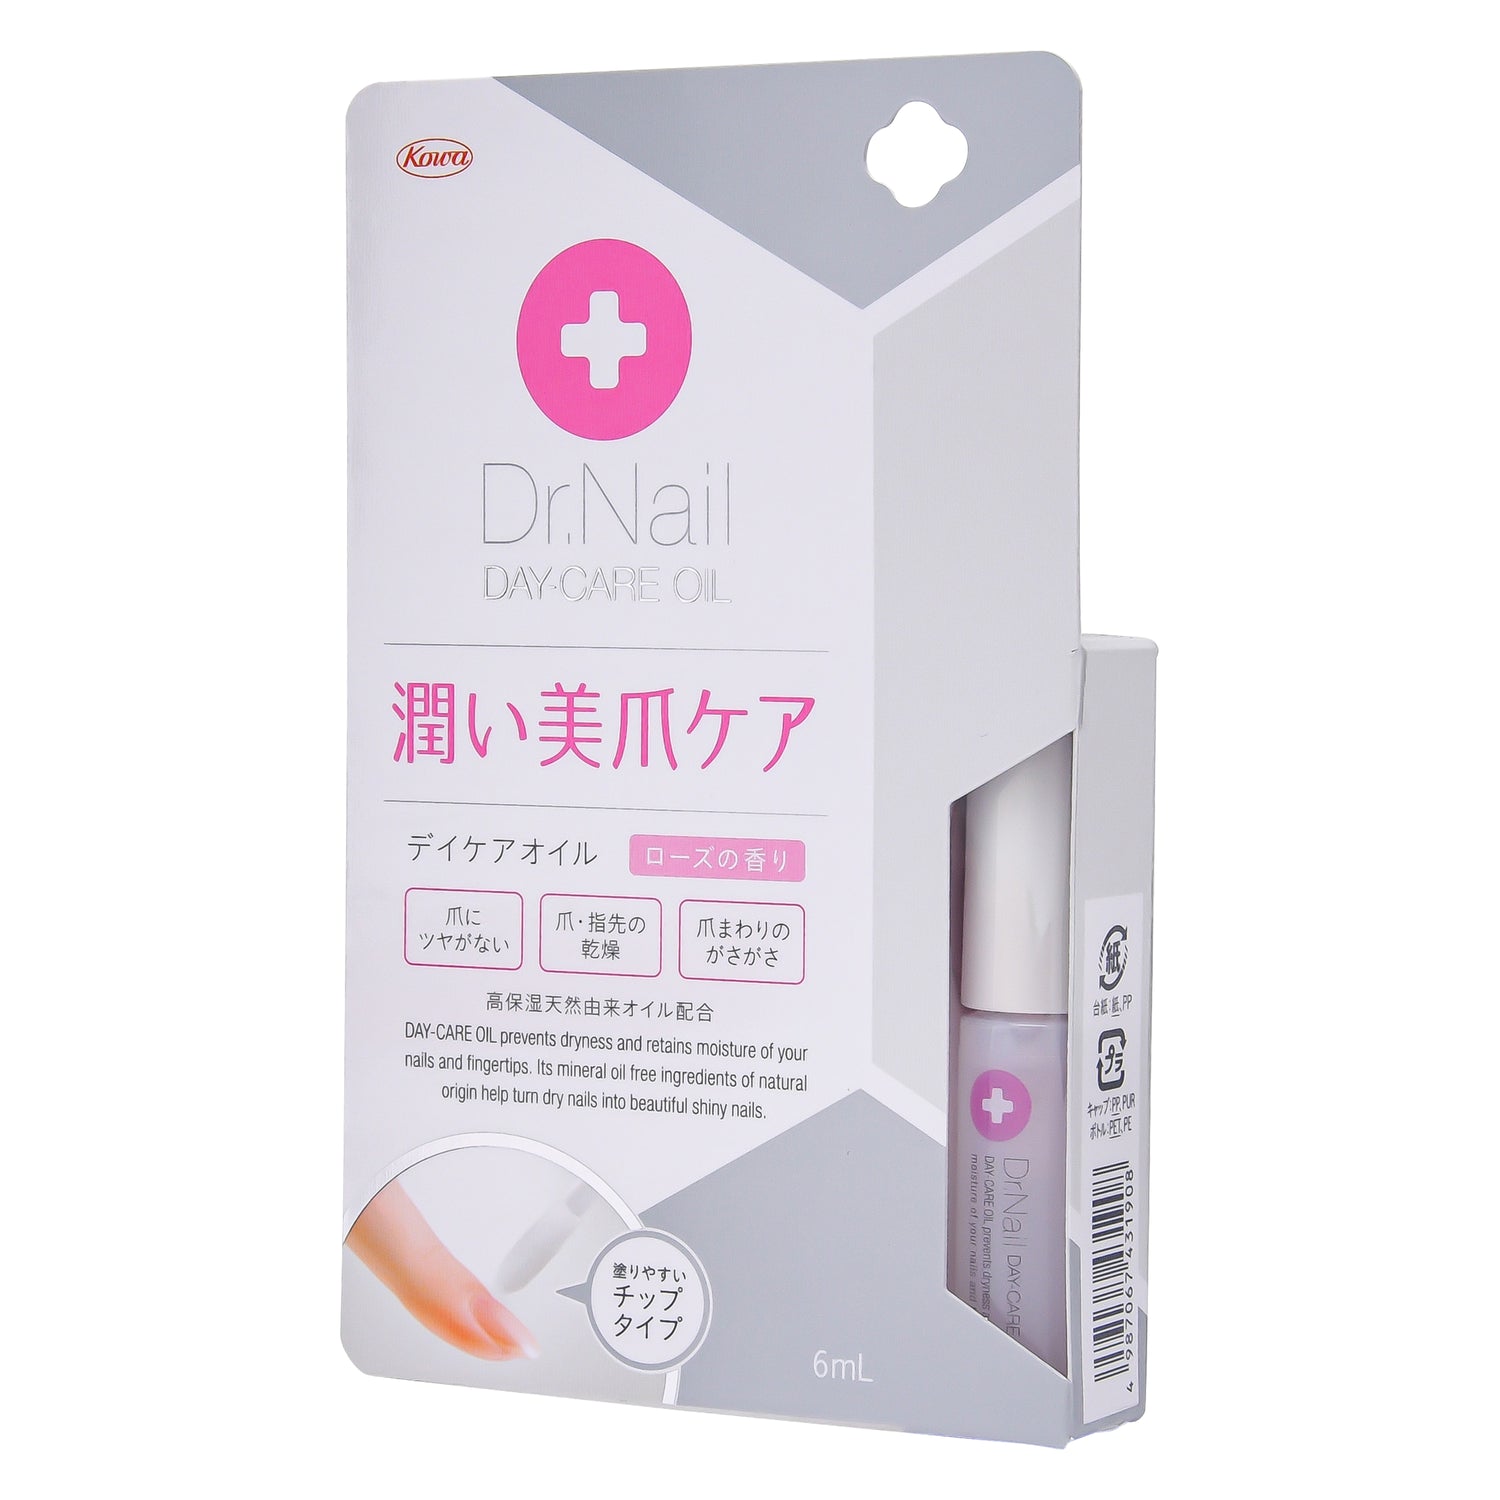 Dr.Nail デイケアオイル 6ml – スギ薬局 Beauty Store